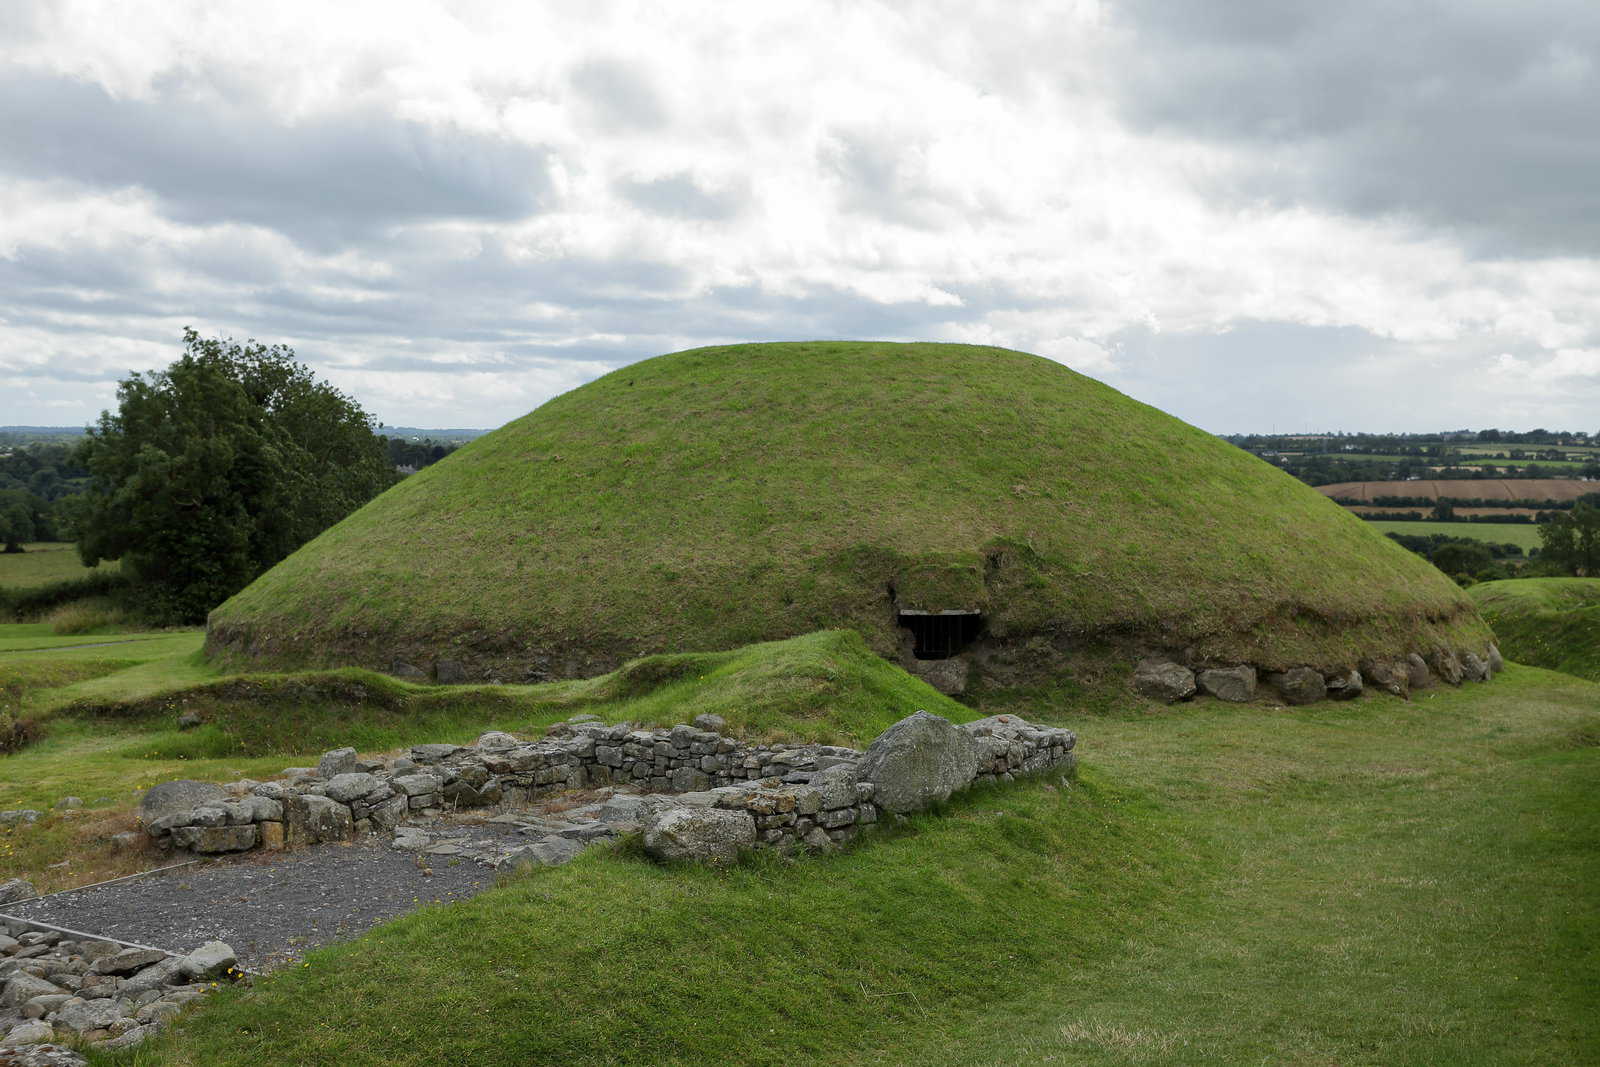 The celts buried their dead in burial mounds